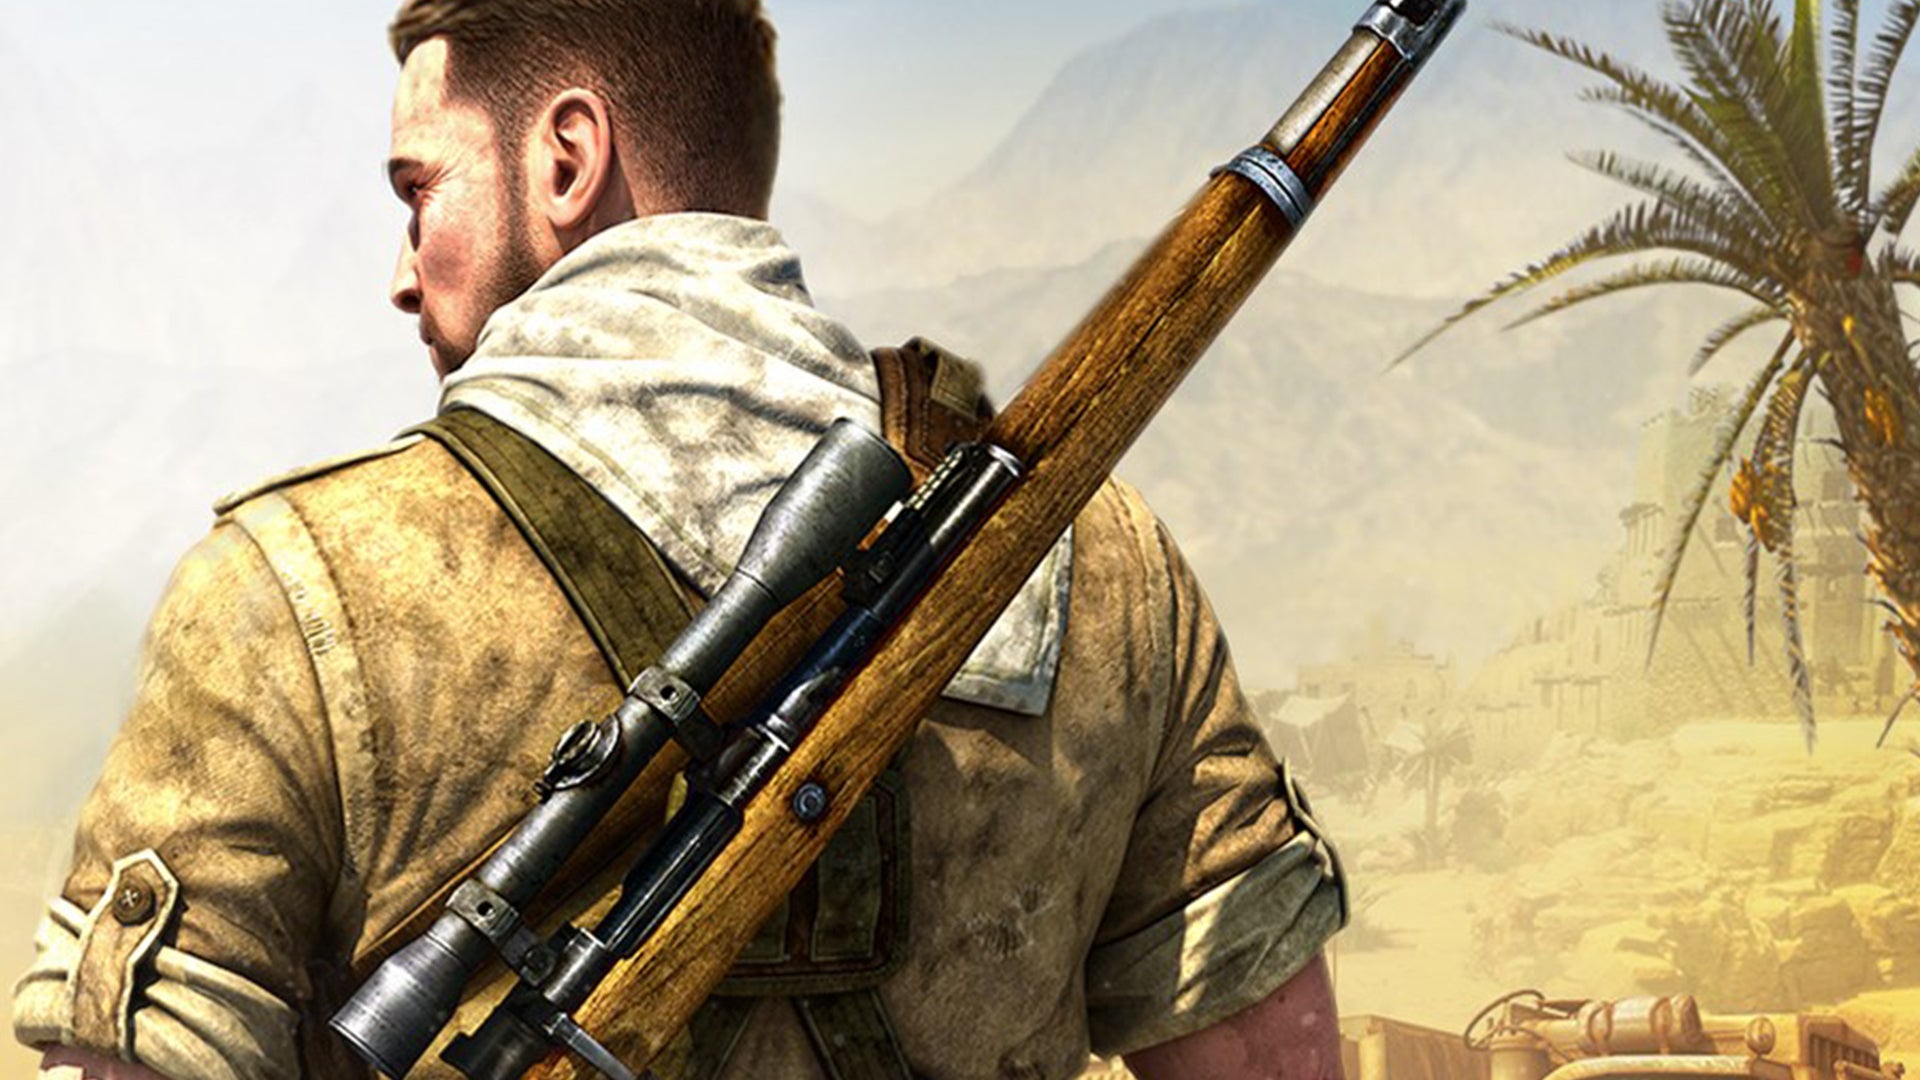 Image for Sniper Elite 3 Ultimate Edition: Switch vs PS4 Tested - A Superb Conversion!